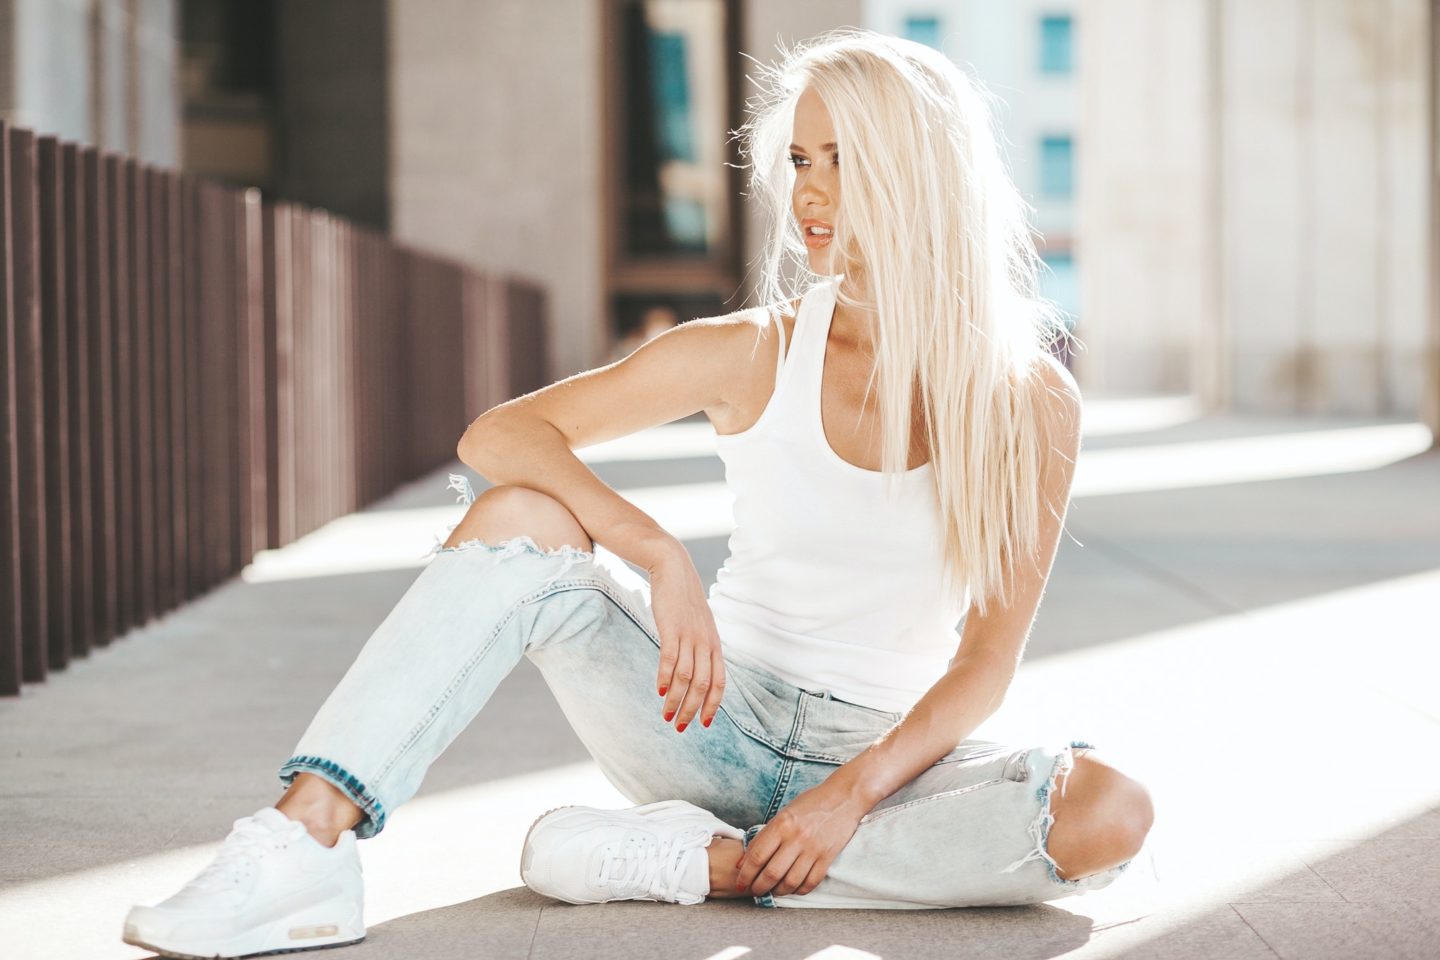 Portrait of young stylish woman in jeans posing outdoors